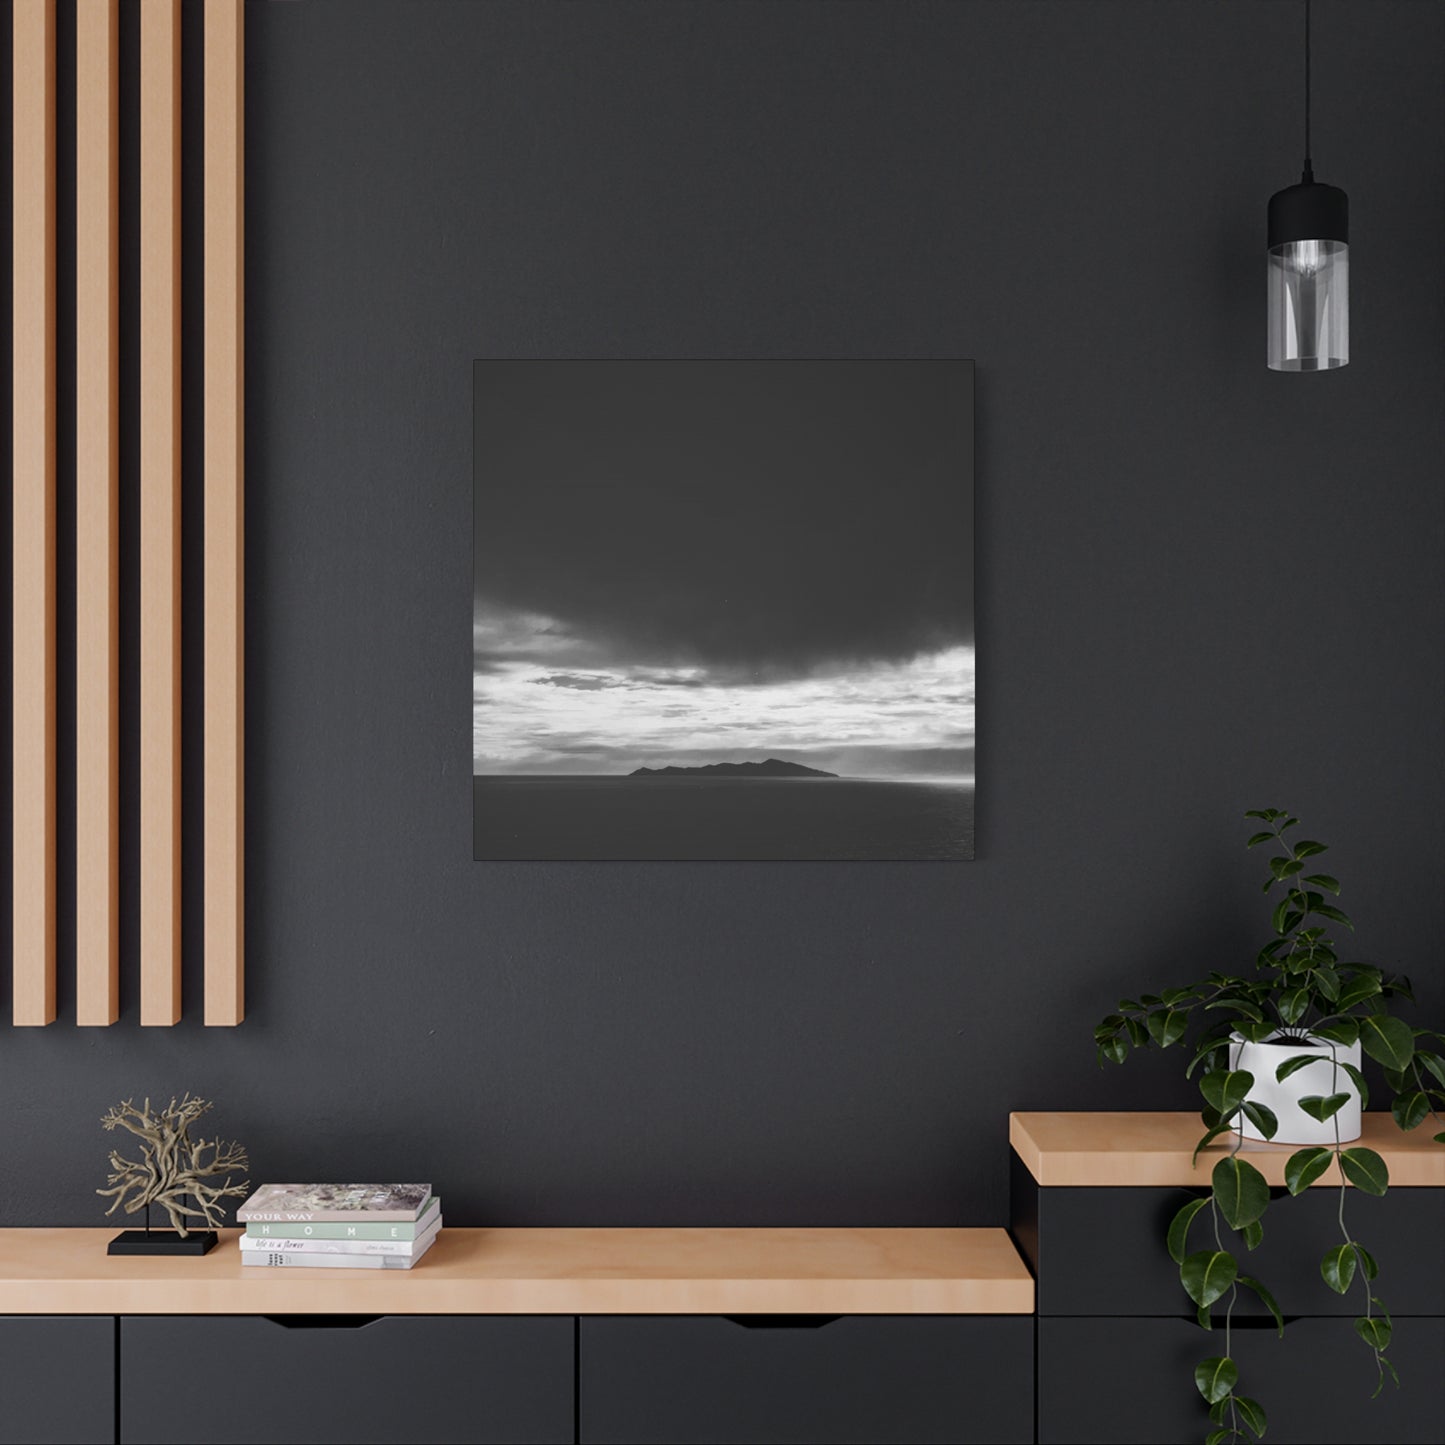 Dark and Stormy Wall Art & Canvas Prints